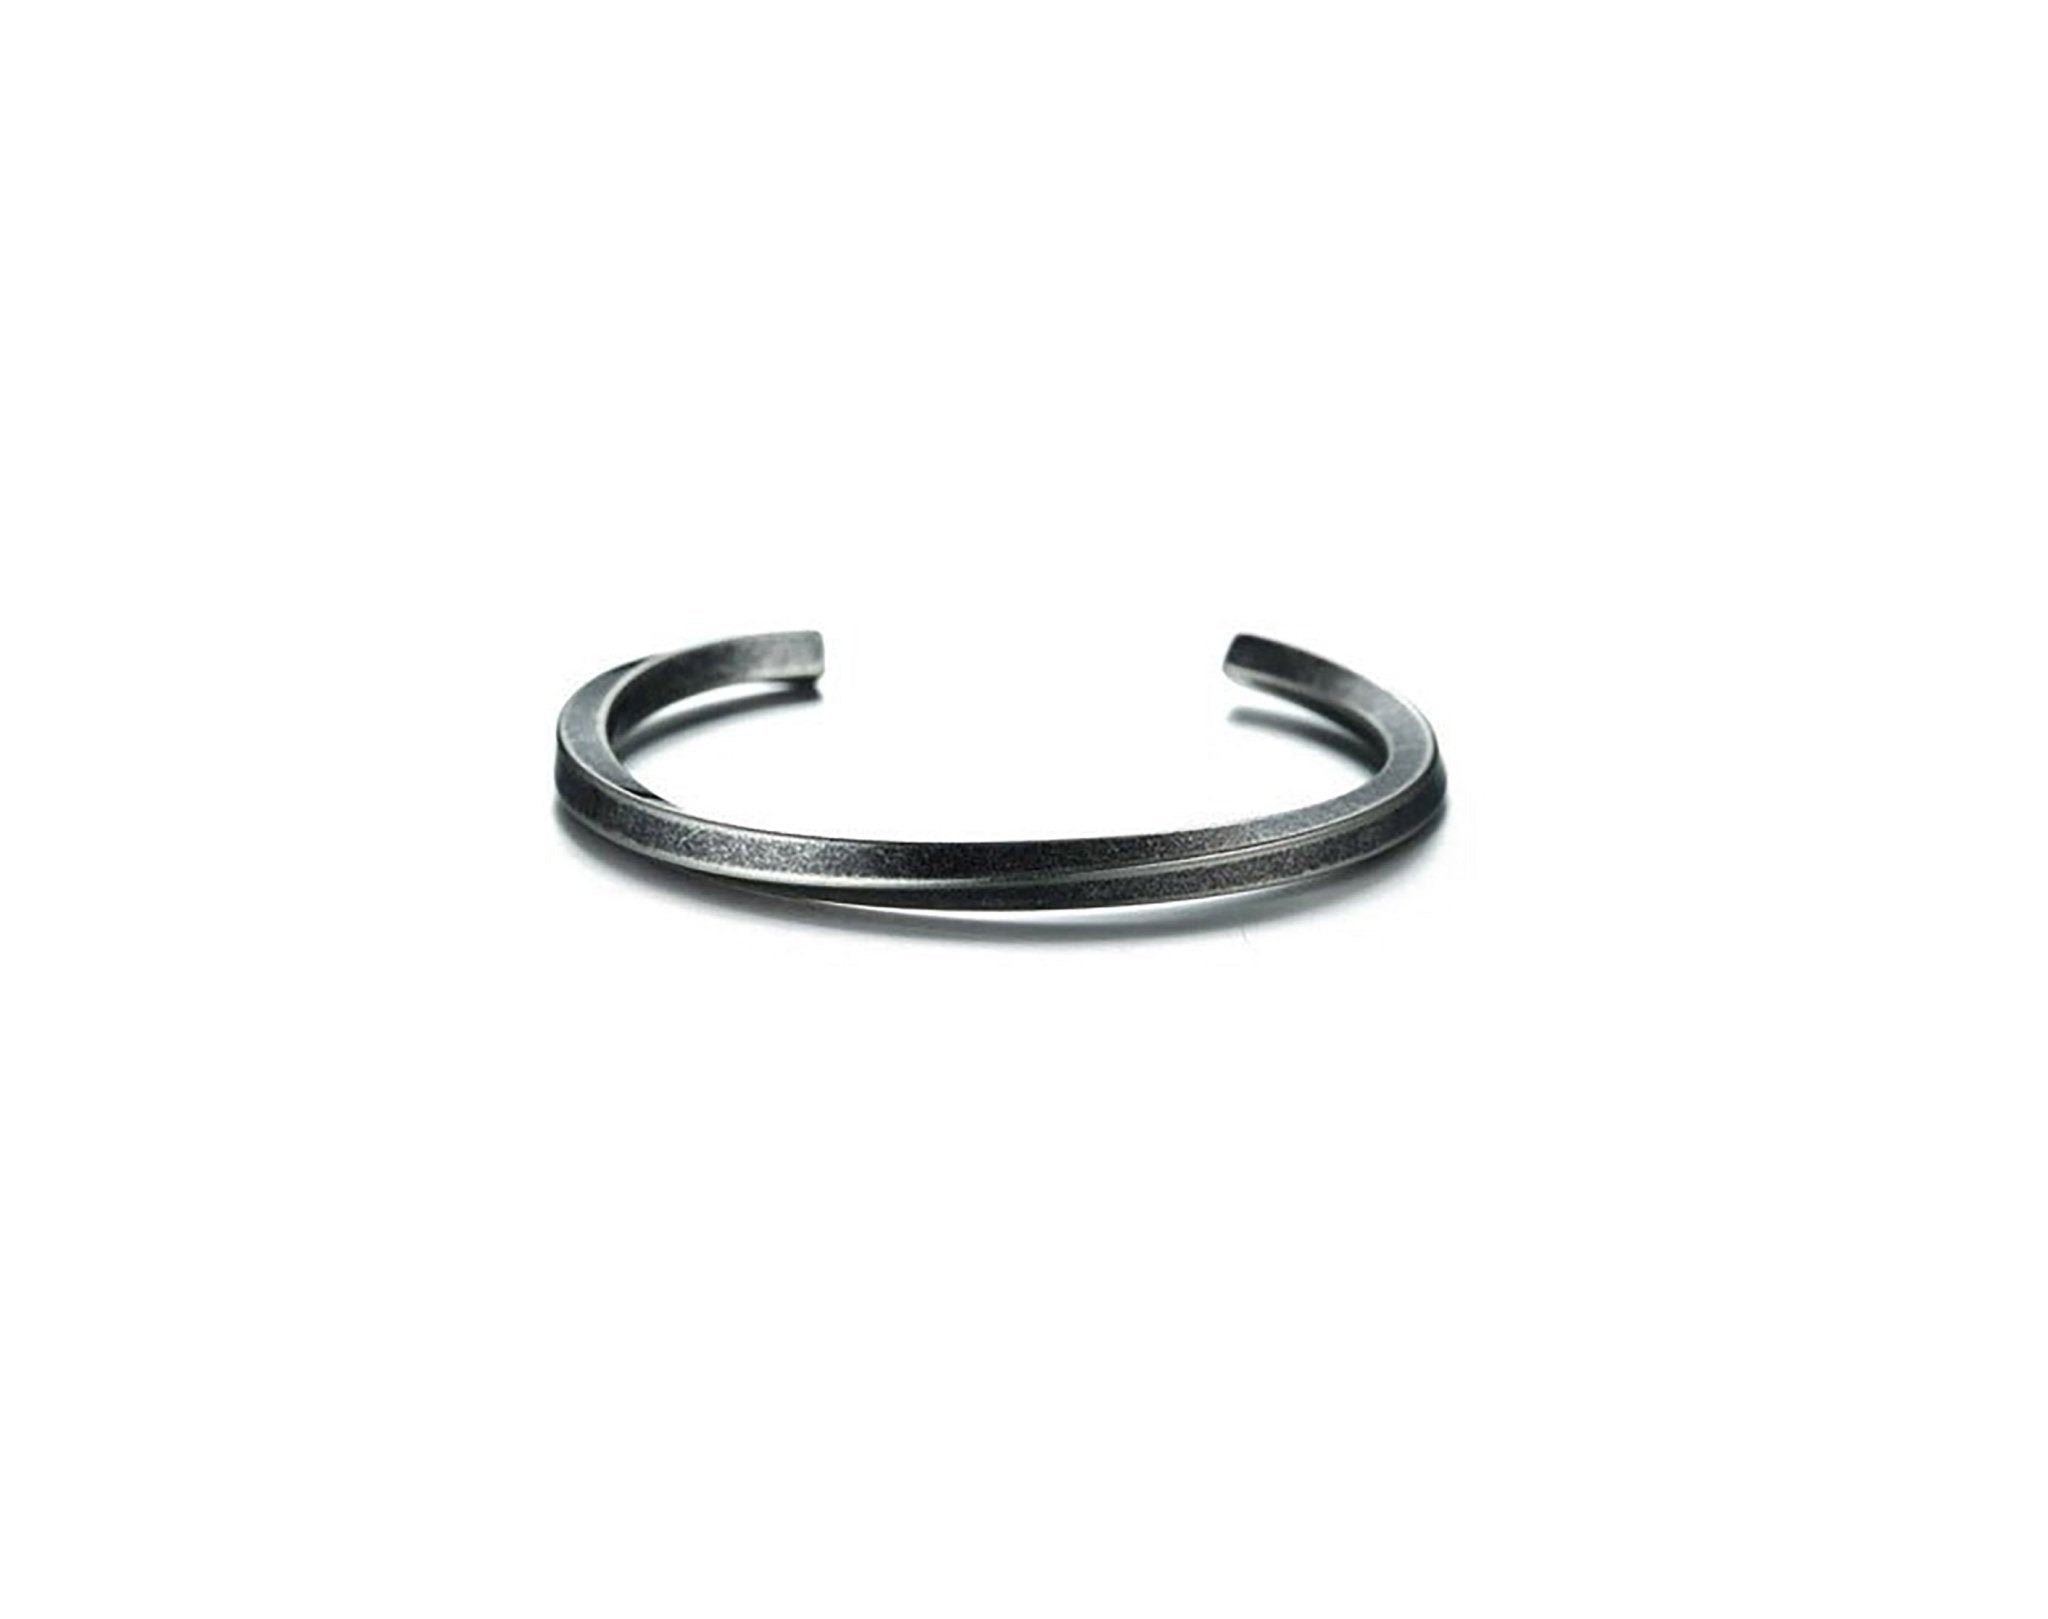 Ugo Twisted Stainless Steel Cuff